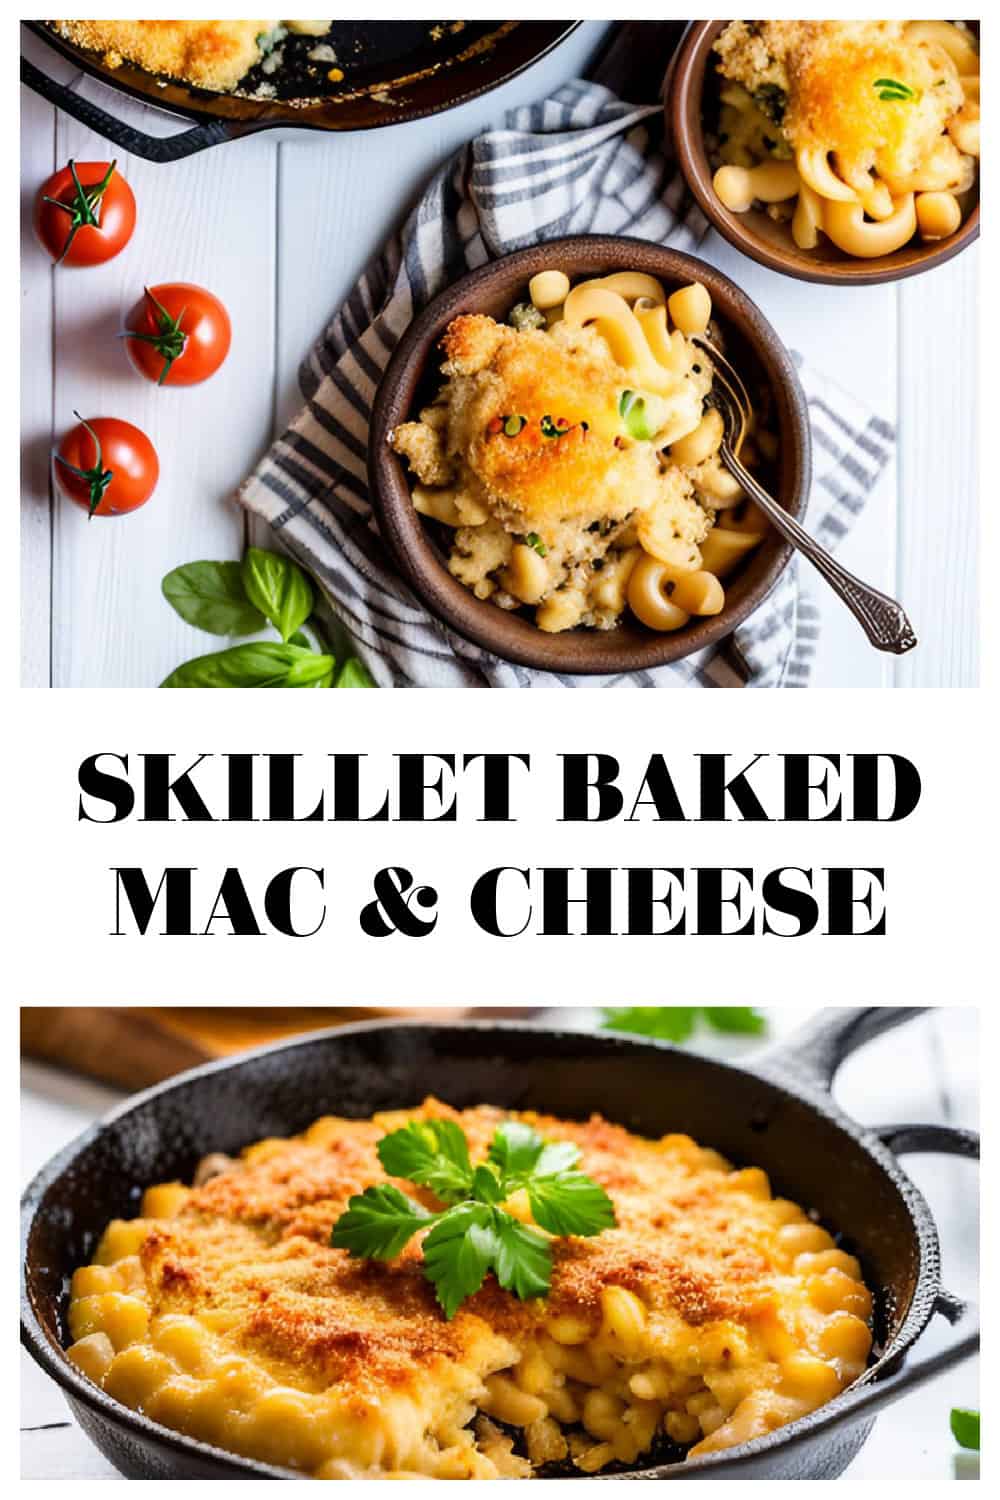 If you love cooking in cast iron, try my Skillet Baked Mac and Cheese. Cast iron macaroni and cheese is one of my favorite comfort foods.